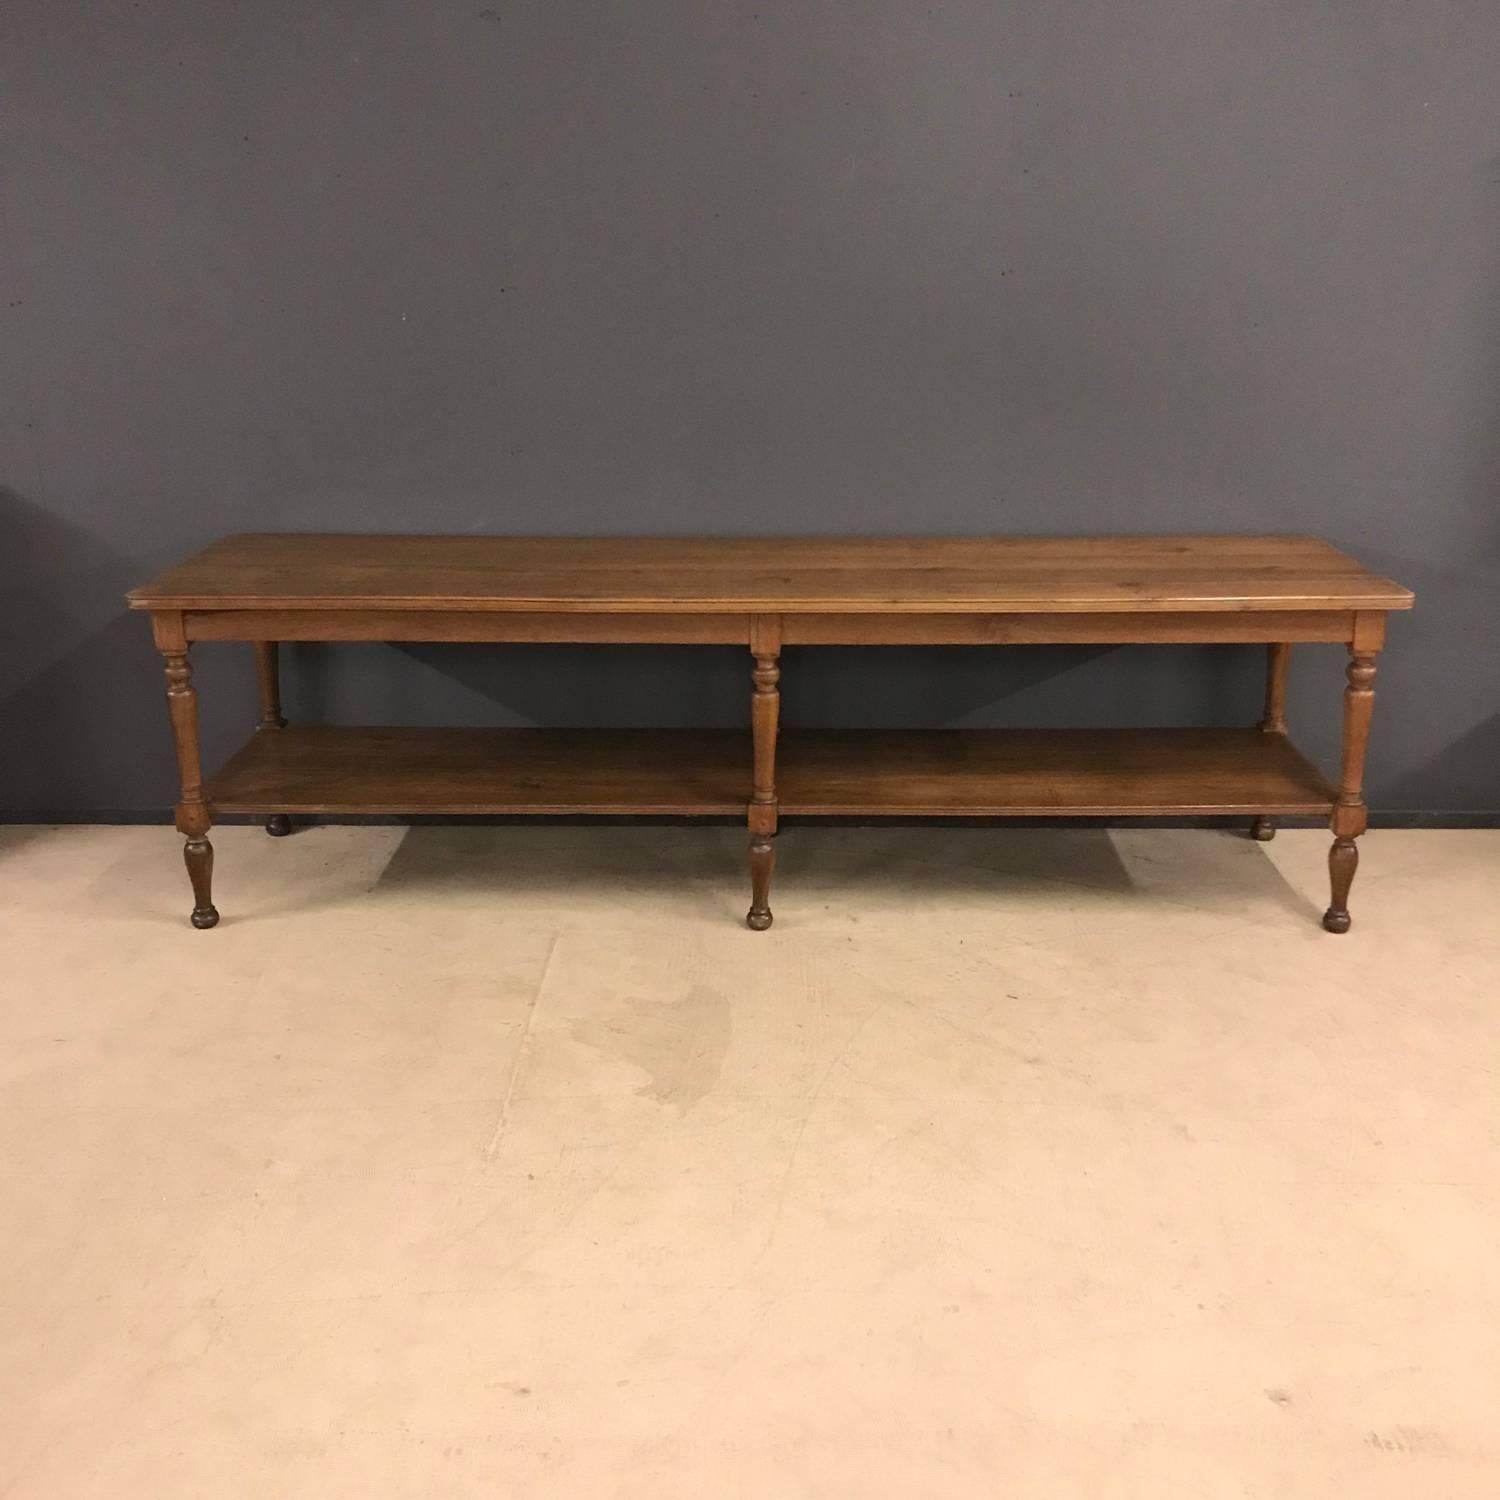 Elegant French antique drapers table. Made of oak in France during the late 19th century. Has been waxed and polished and remains in good condition.